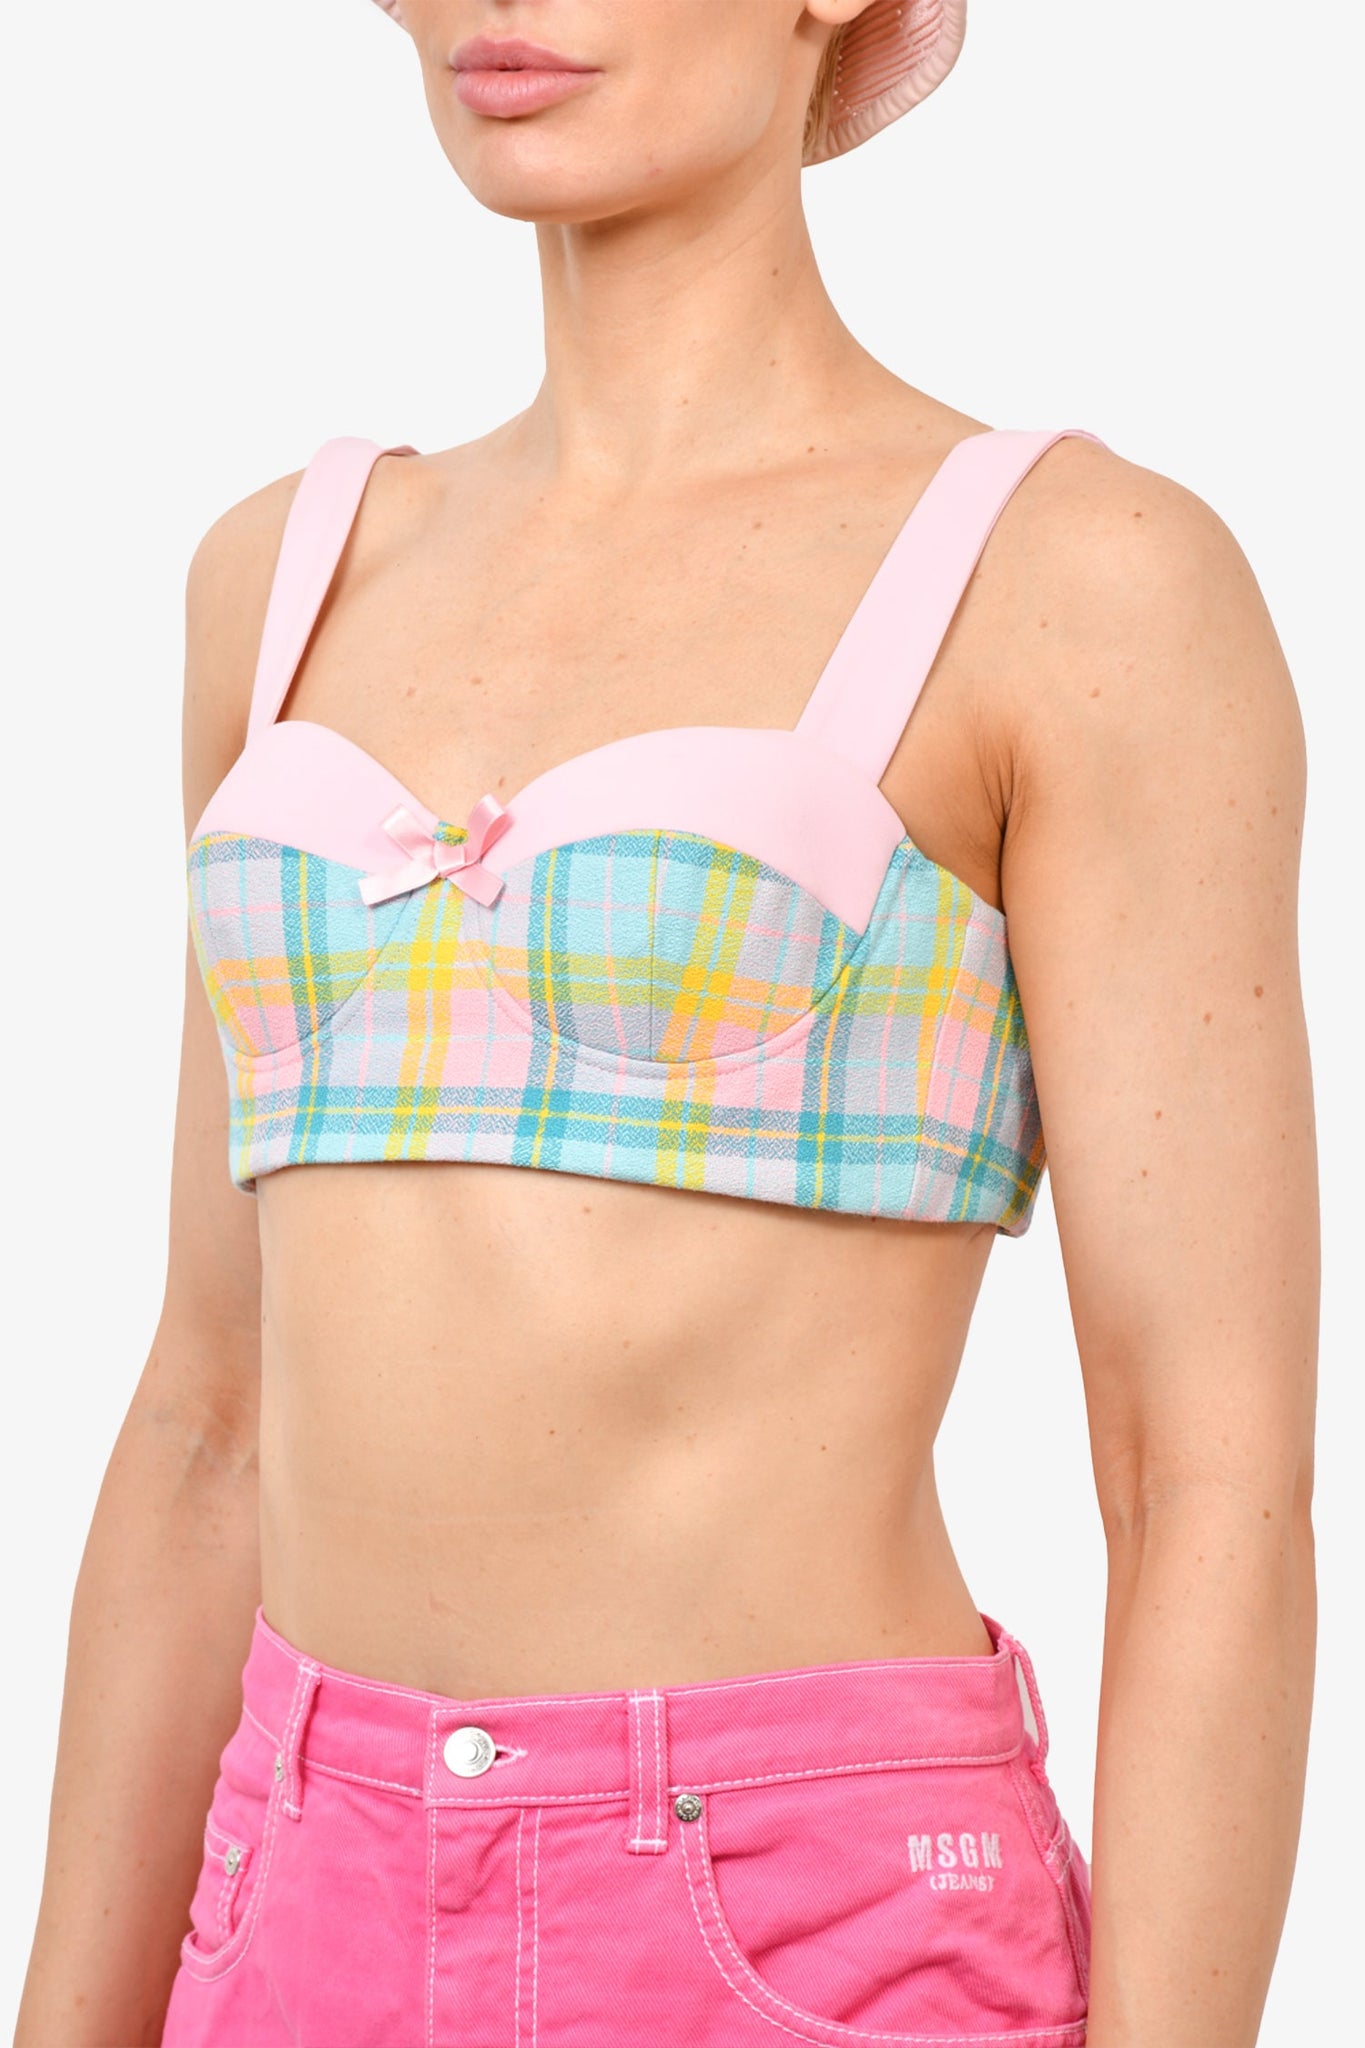 Moschino Pink/Blue Bustier Sleevess Bra Top sz 38 w/ Tags – Mine & Yours